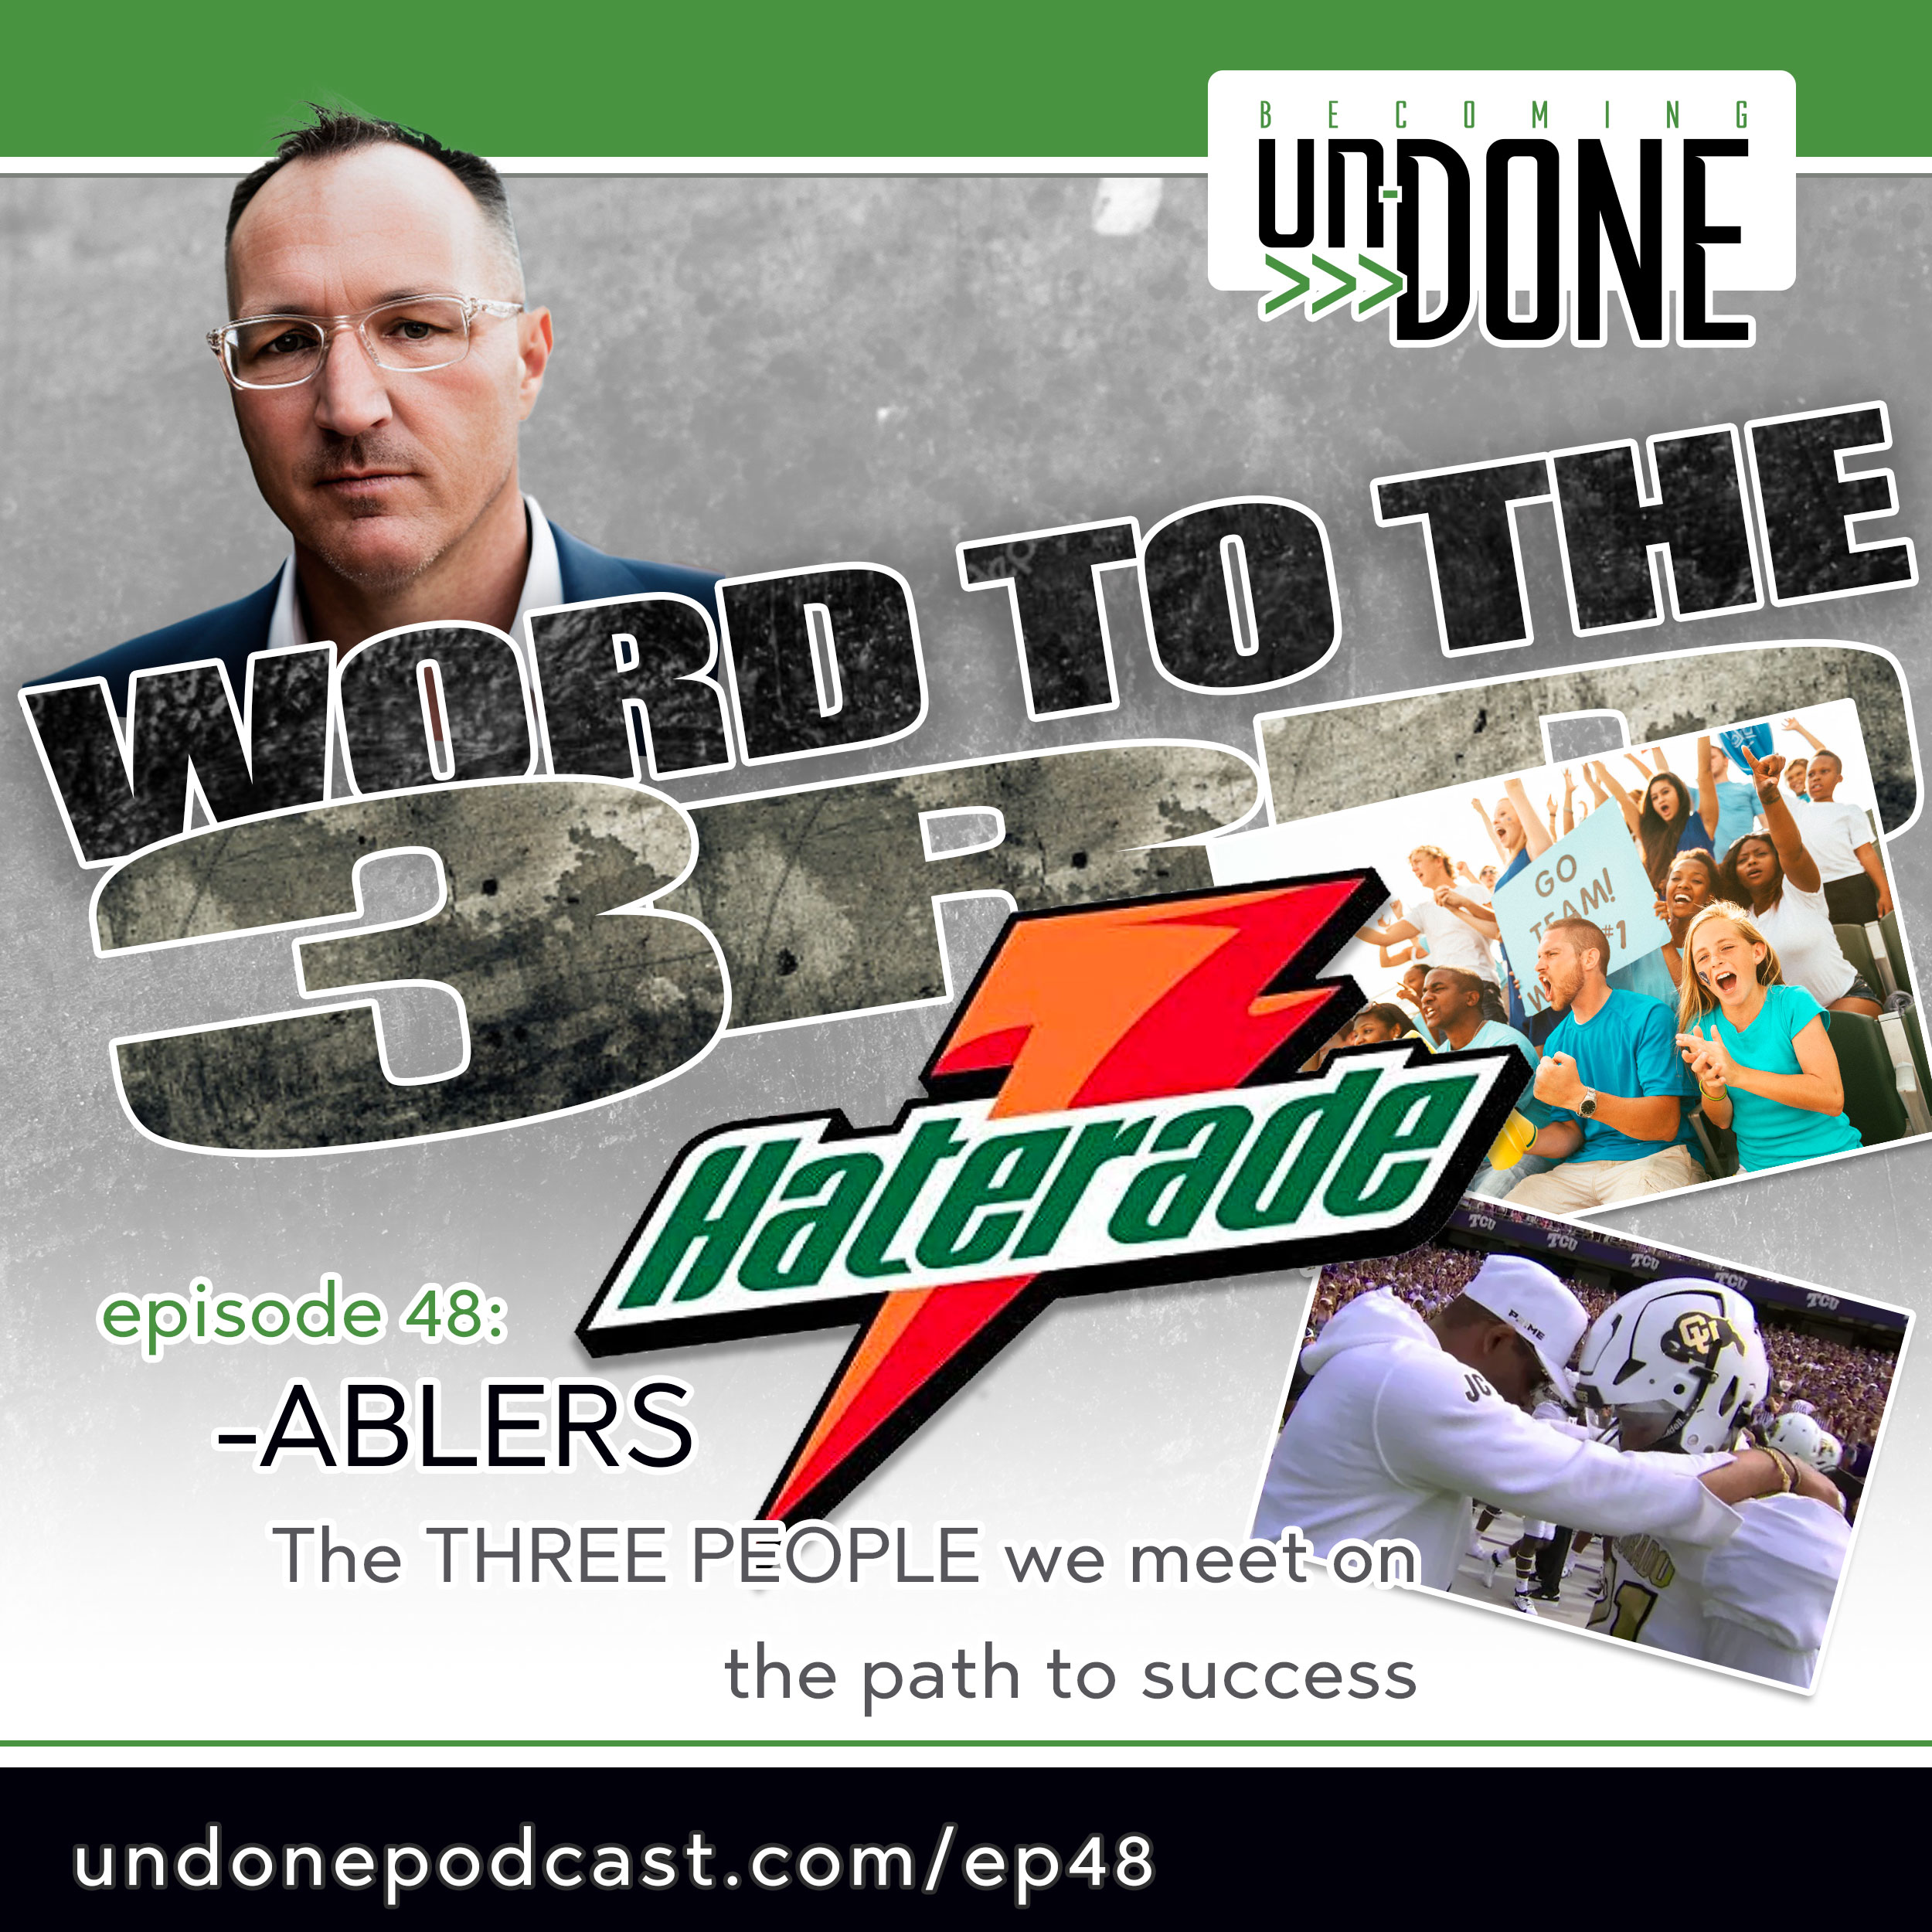 Episode 46: HURDLES with Tim Kight